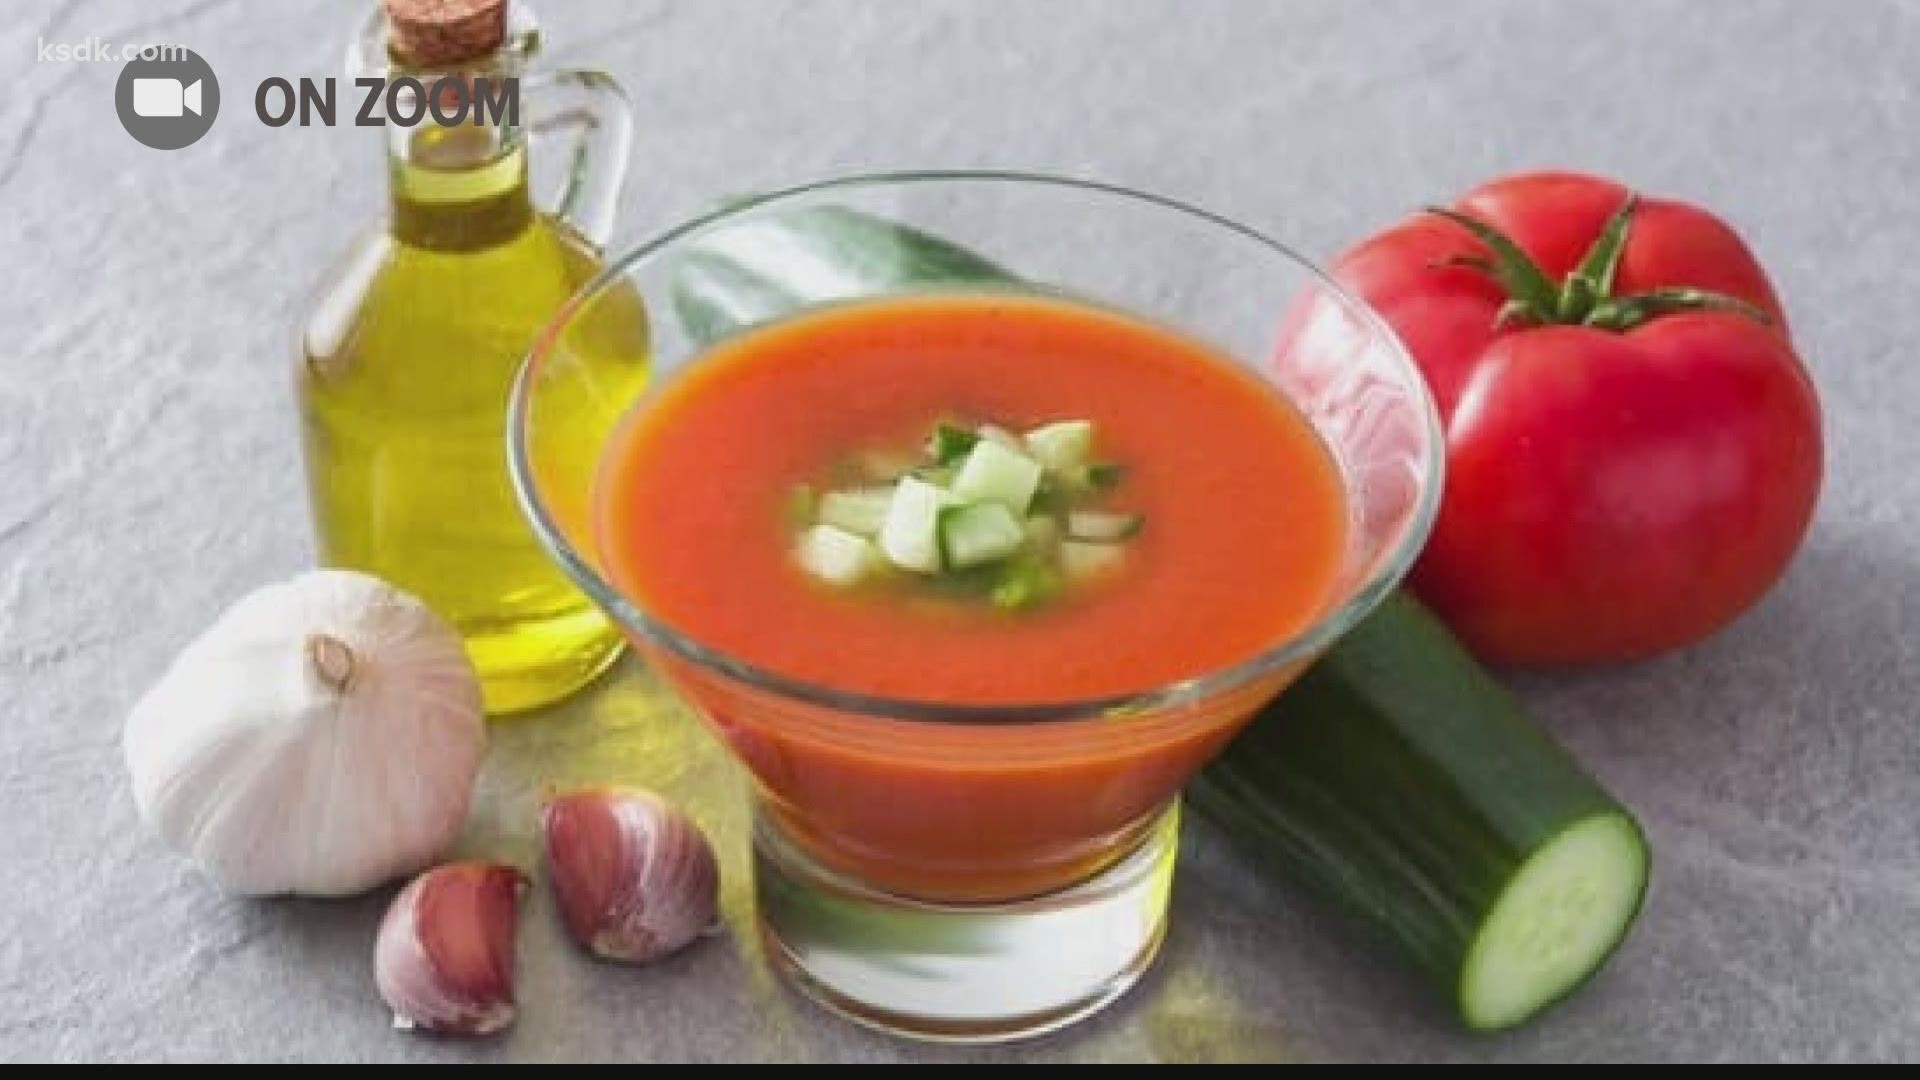 Stephanie Bosch of the ‘All Shook Up’ blog shares a recipe for Watermelon Gazpacho.